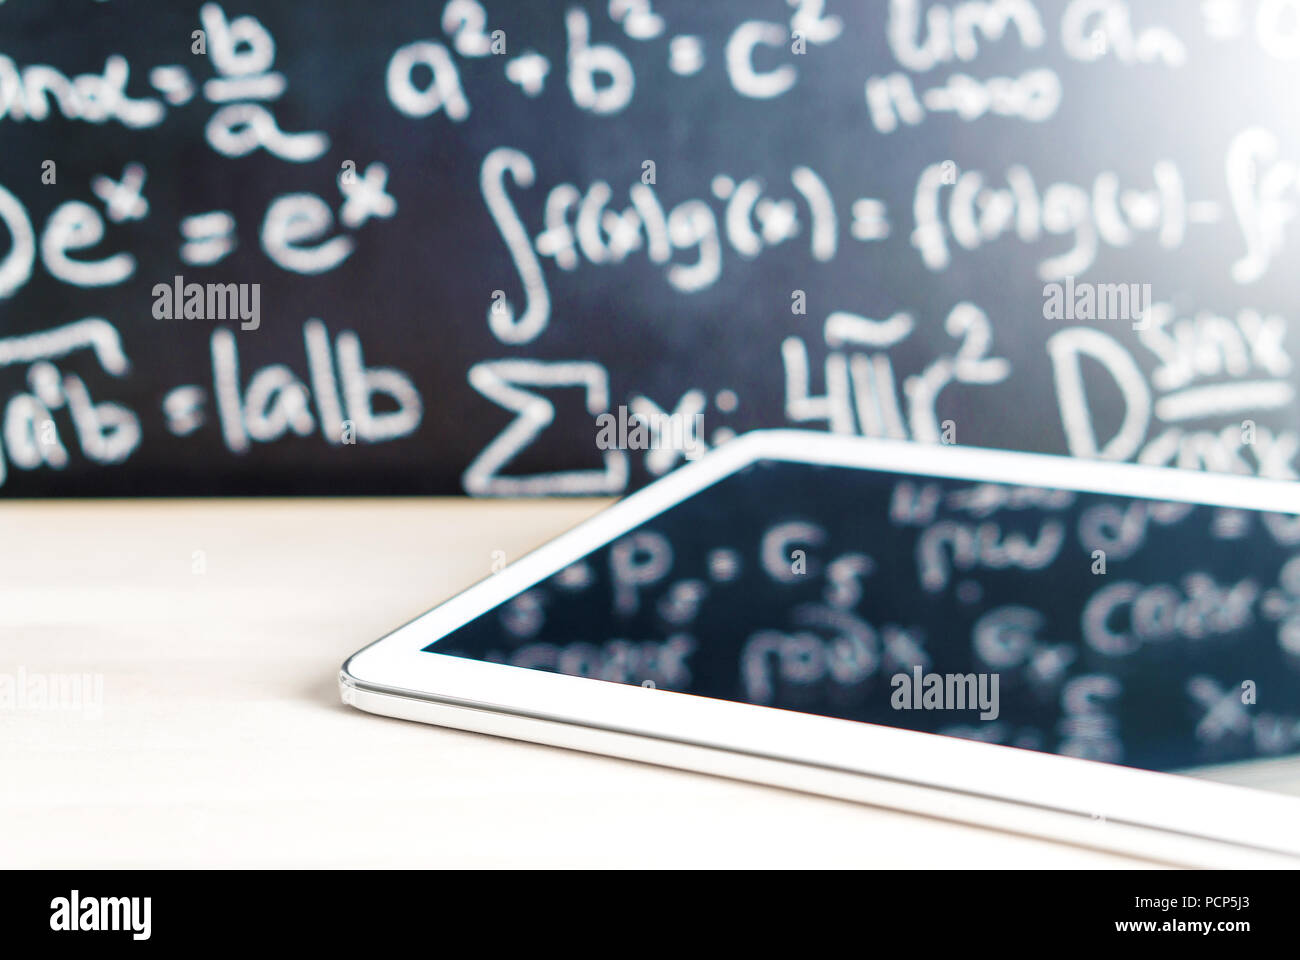 Modern education and e learning concept. Tablet in front of a blackboard full of writing at school. Smart mobile device and chalkboard in classroom. Stock Photo